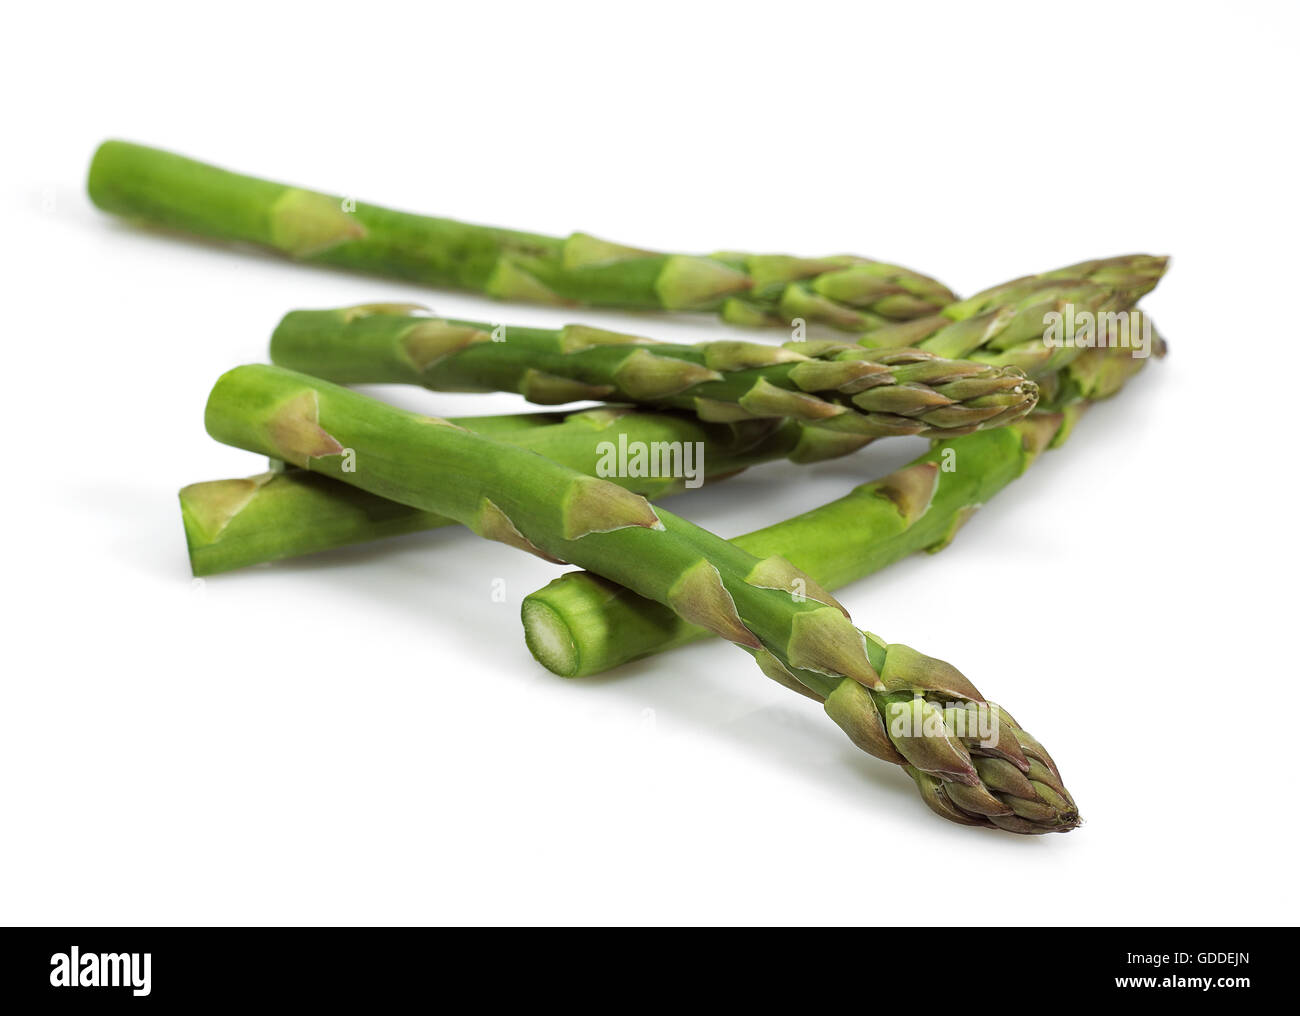 Green Asparagus, asparagus officinalis  against White Background Stock Photo